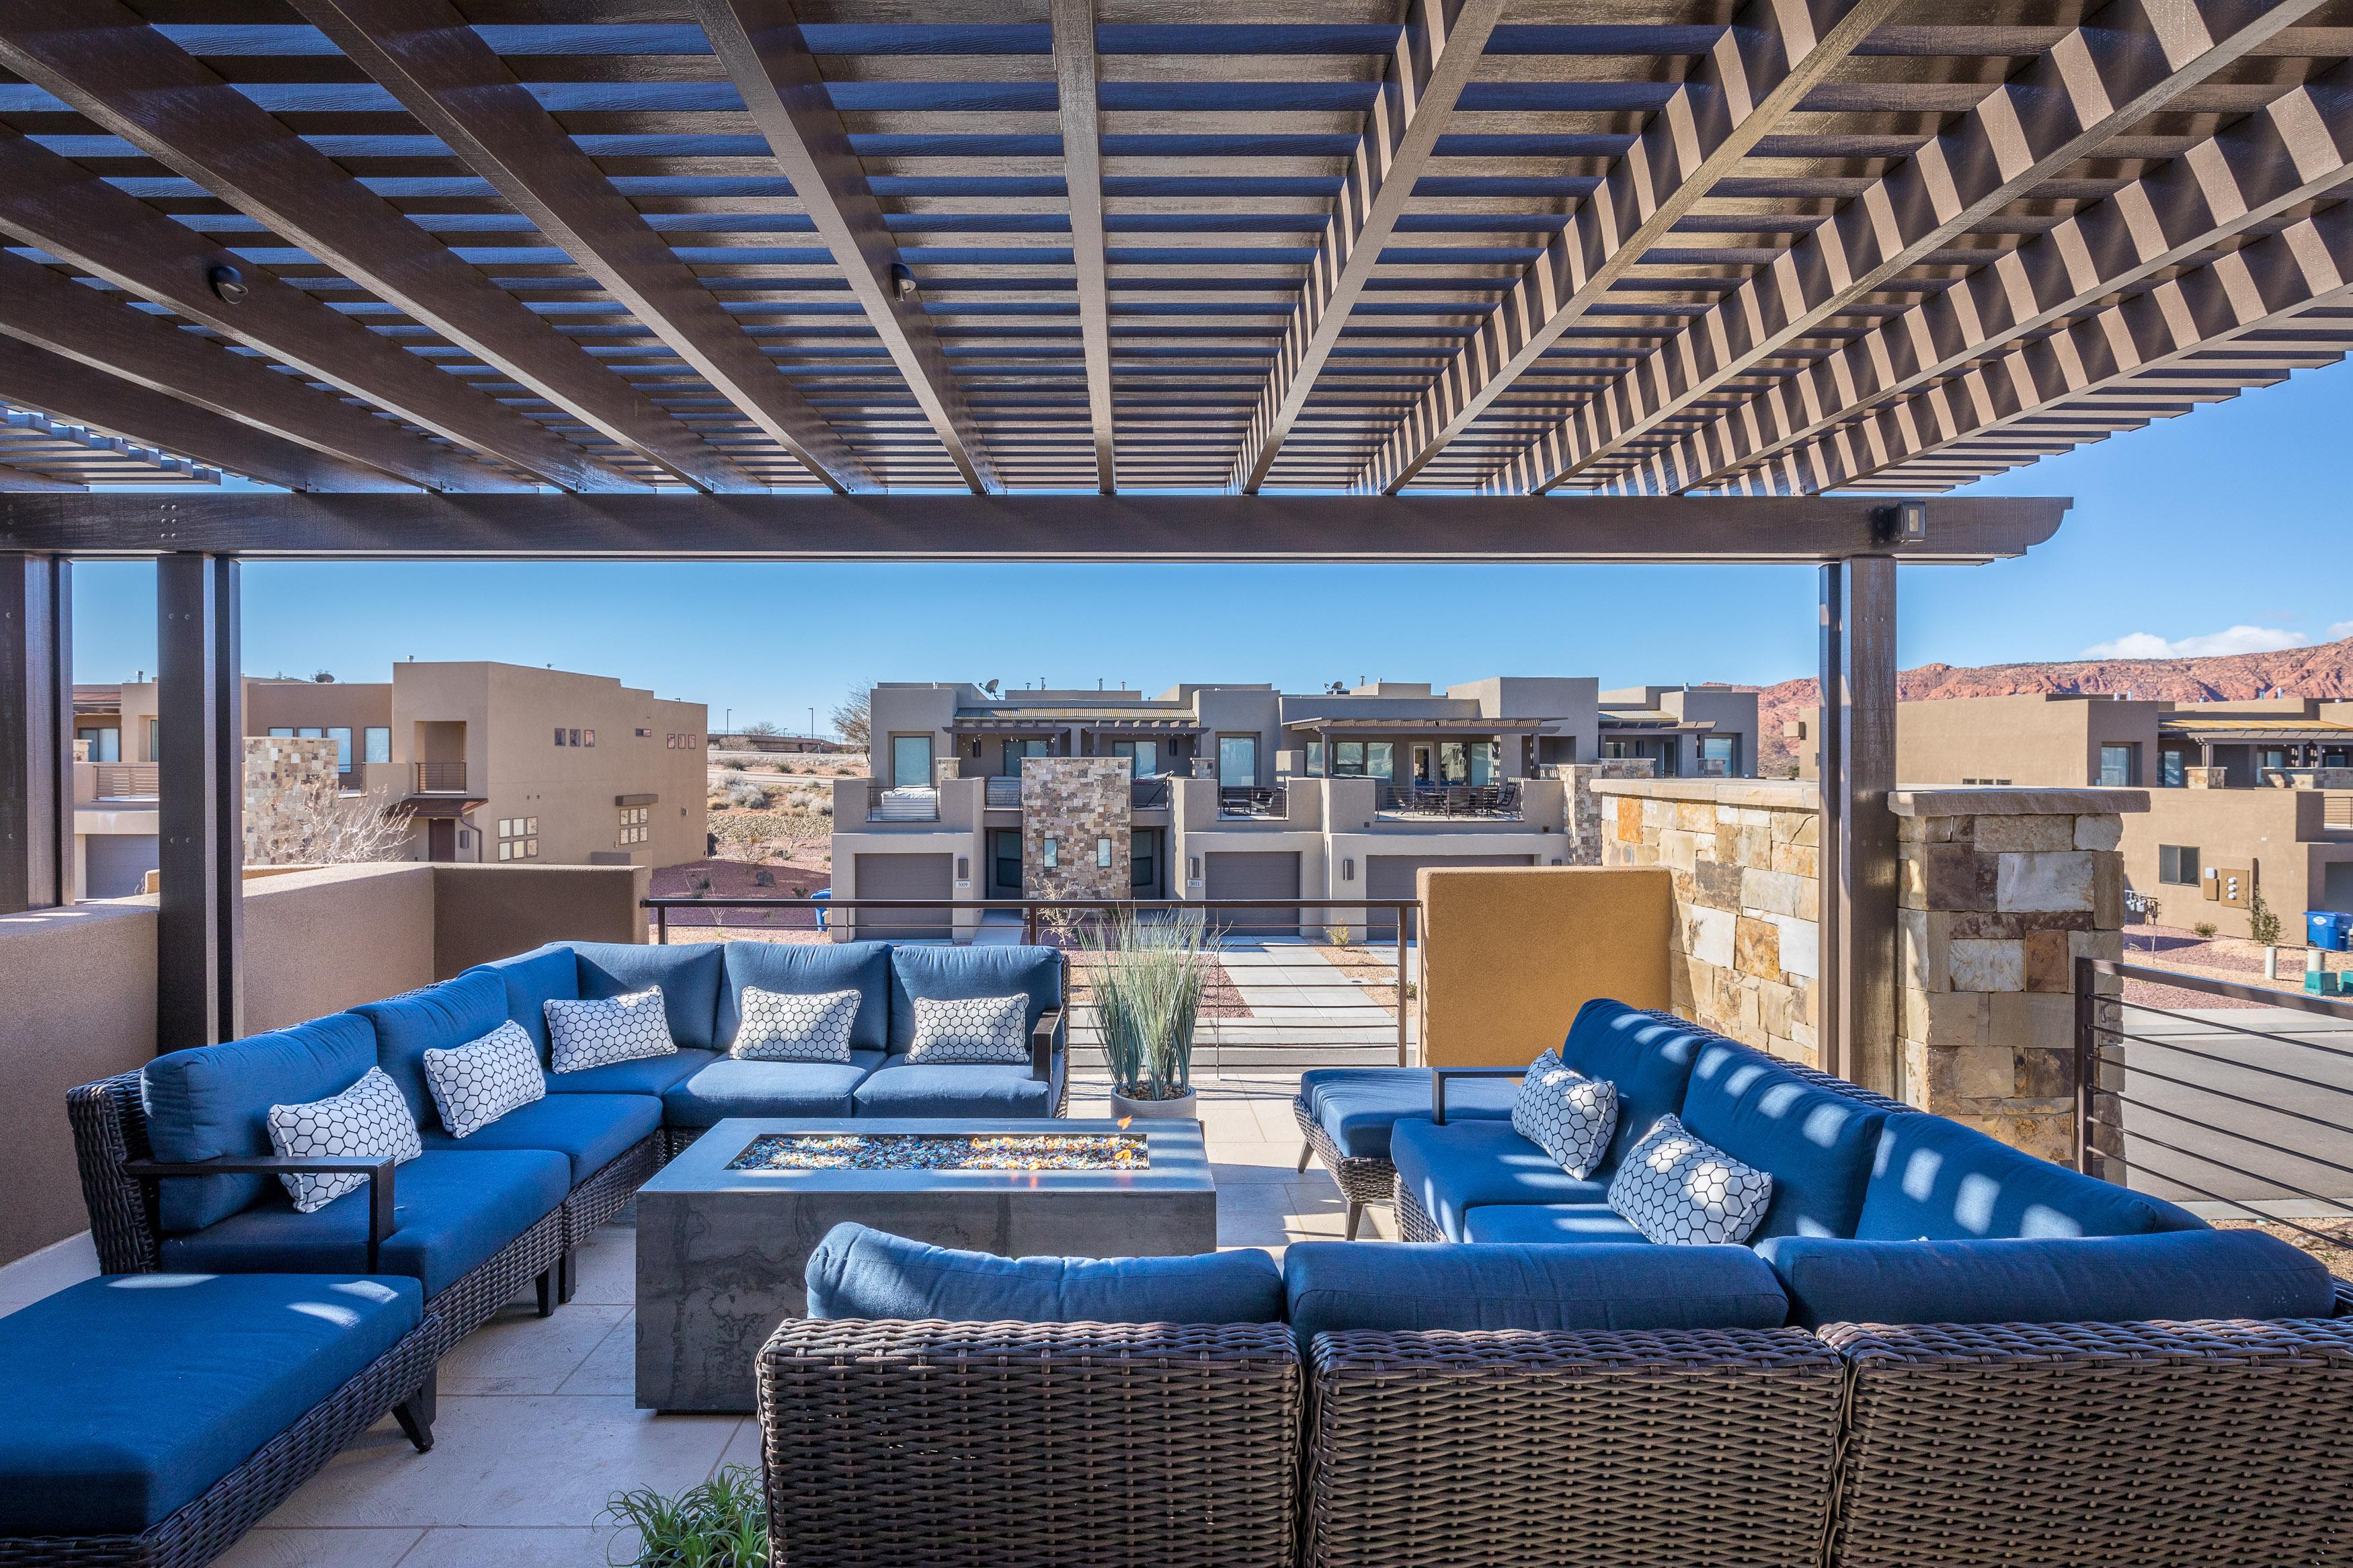 You cannot pass up the opportunity to lounge around on this beautiful front patio area. 